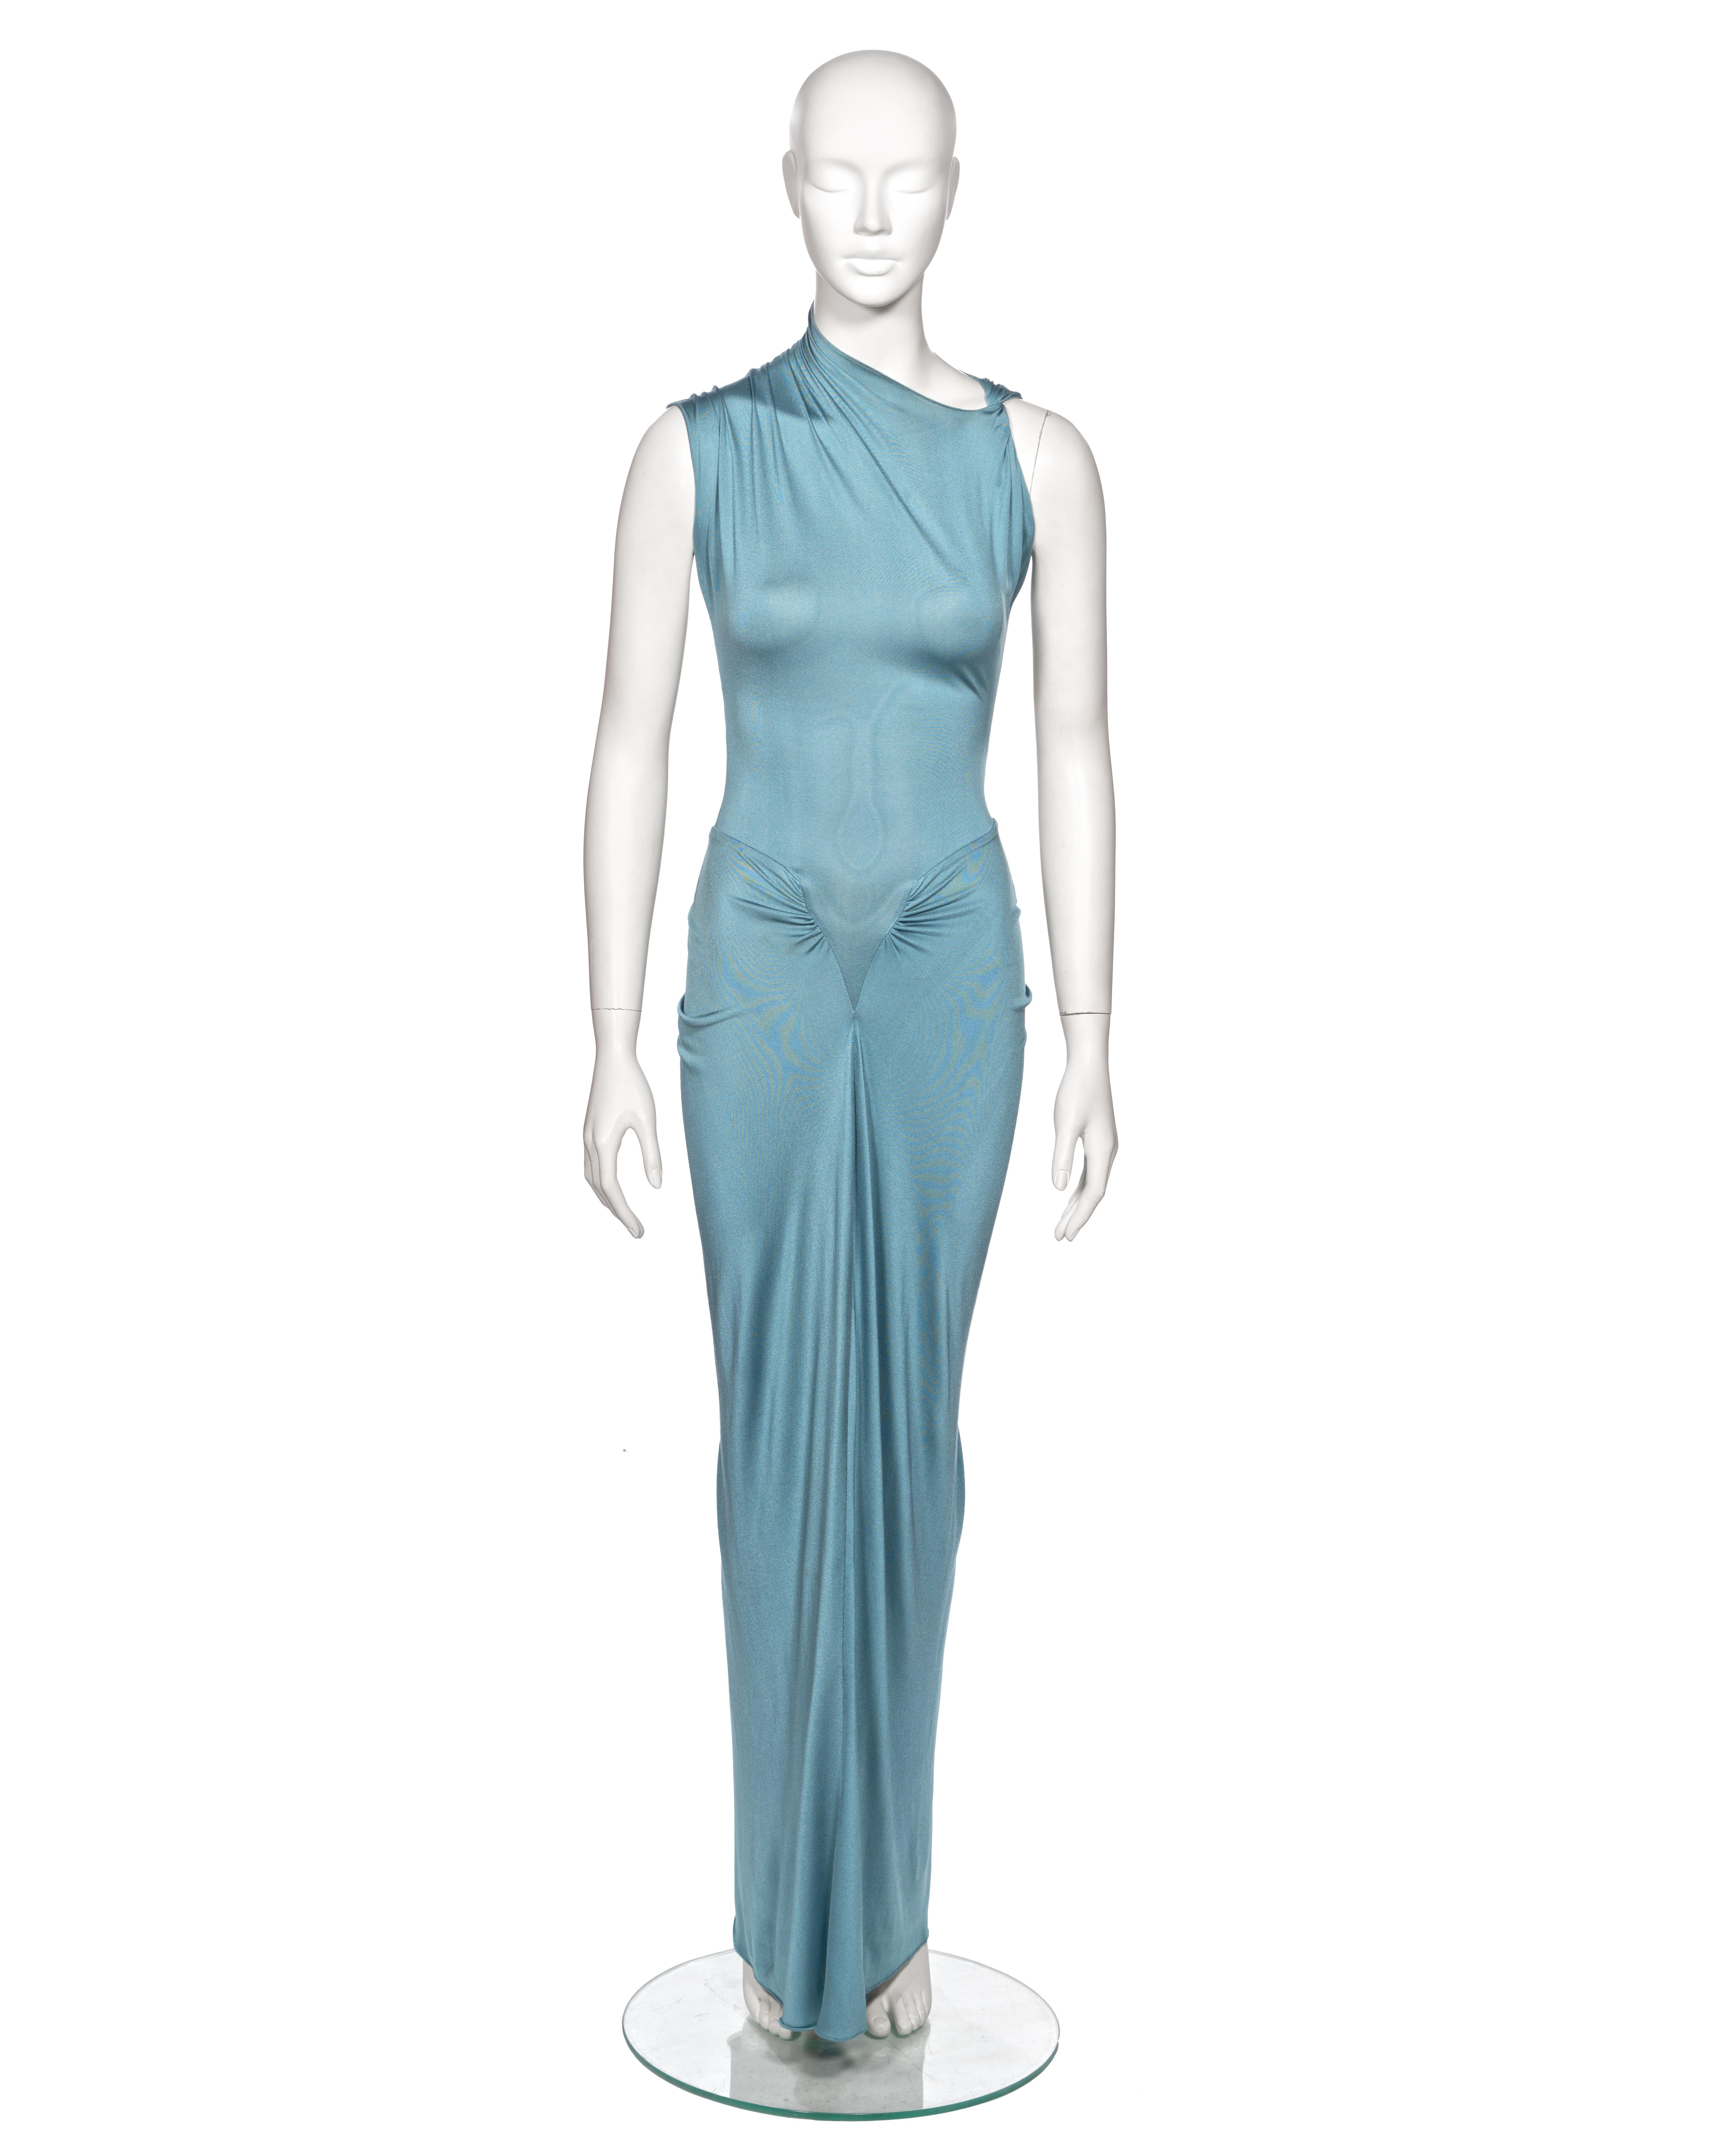 ▪ Rare Christian Dior Evening Dress
▪ Creative Director: John Galliano
▪ Spring-Summer 2000
▪ Crafted from powder blue silk jersey, this garment epitomizes elegance and modernity
▪ Features an asymmetric neckline with a gathered shoulder seam and